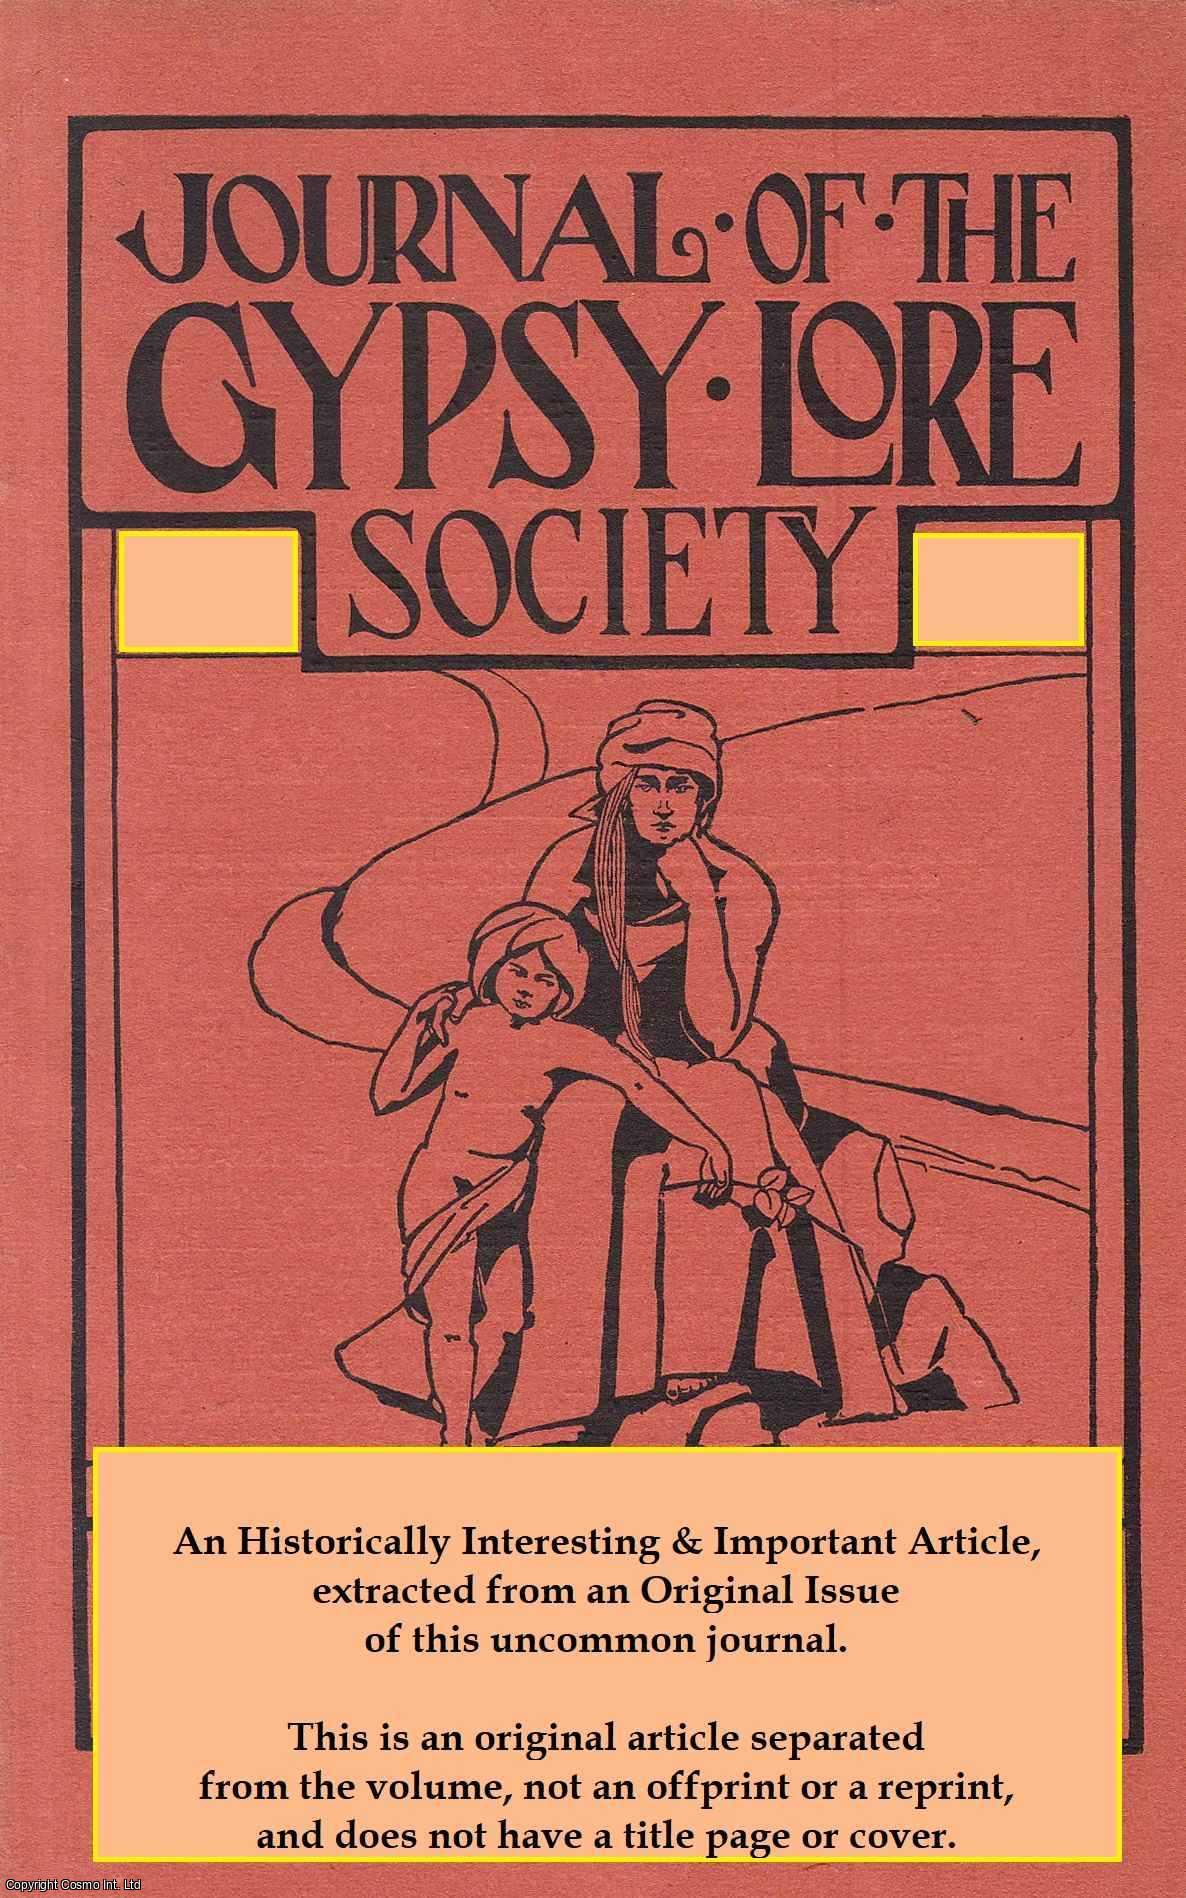 R.L. Turner - The So-Called Prothetic V and Y in European Romani. An uncommon original article from the Journal of the Gypsy Lore Society, 1932.